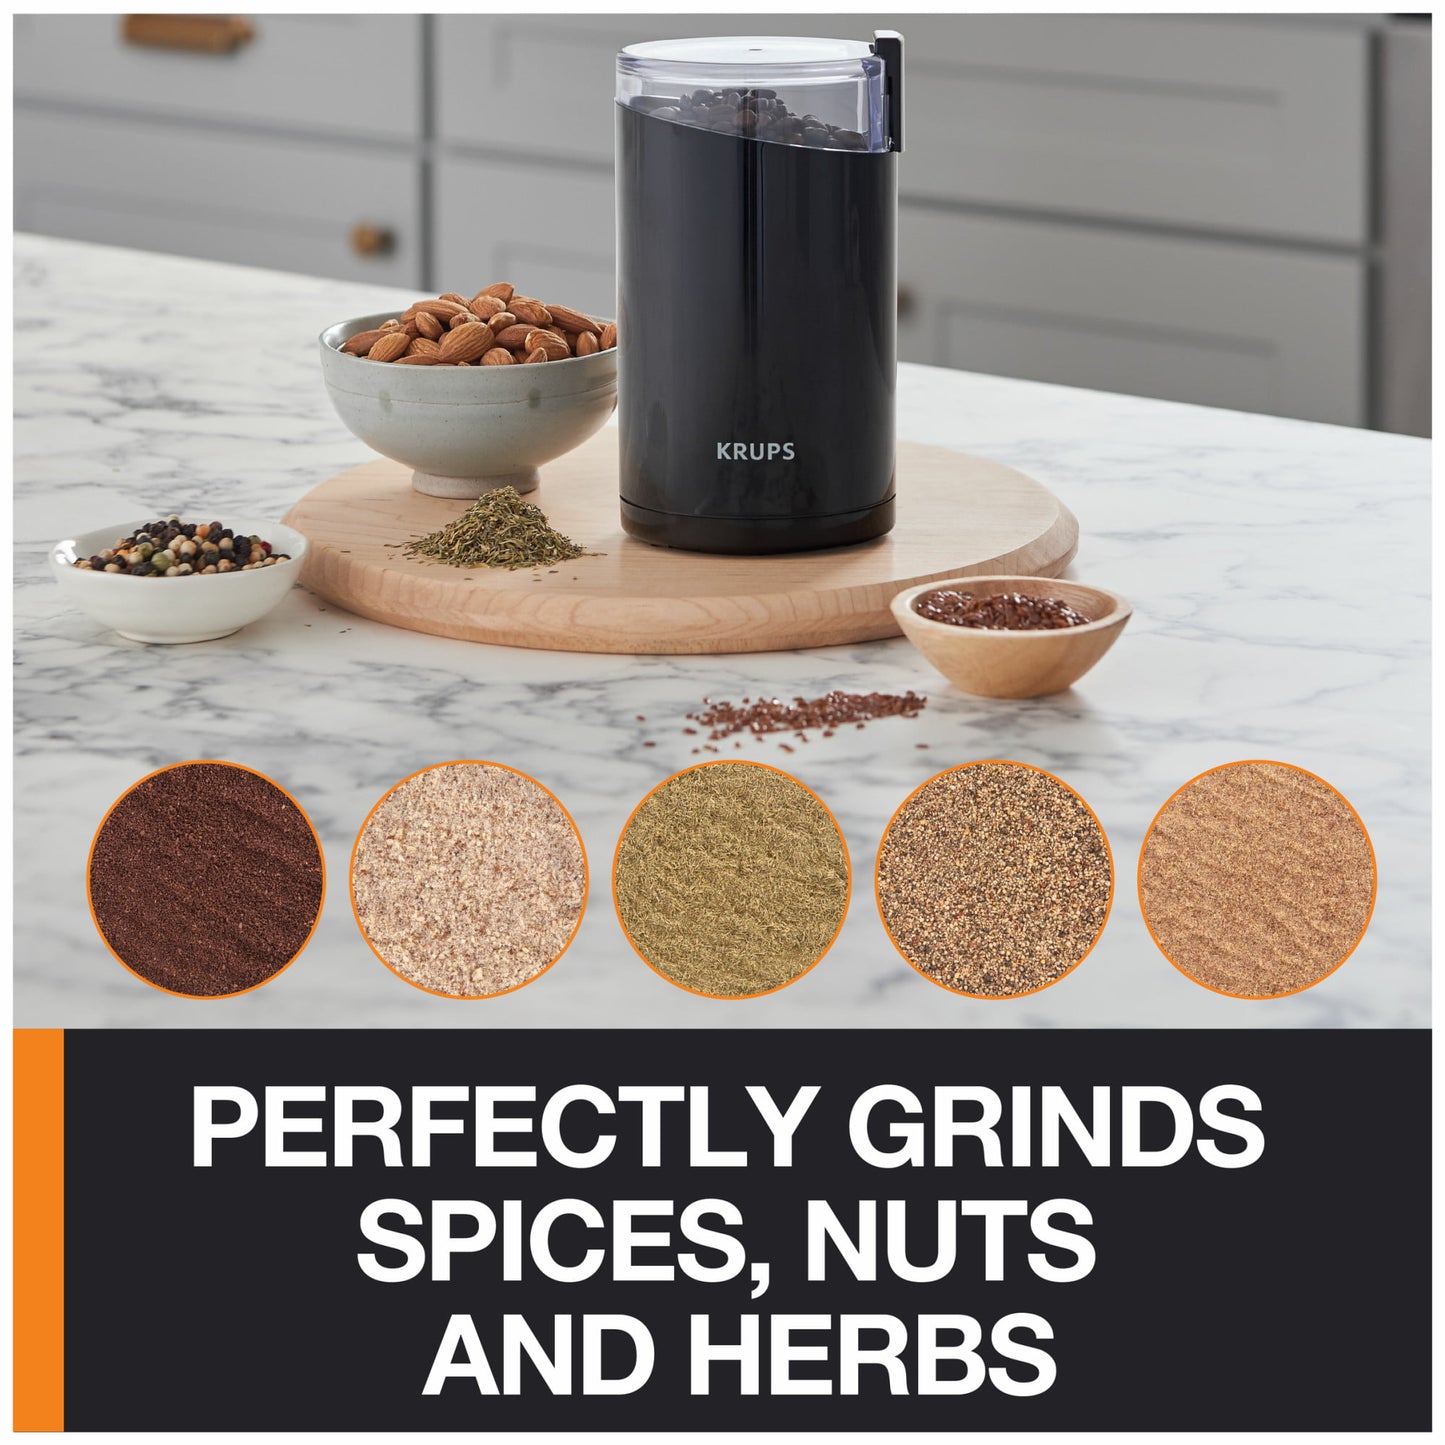 KRUPS Fast Touch Electric Coffee and Spice Grinder With Stainless Steel Blades F2034251